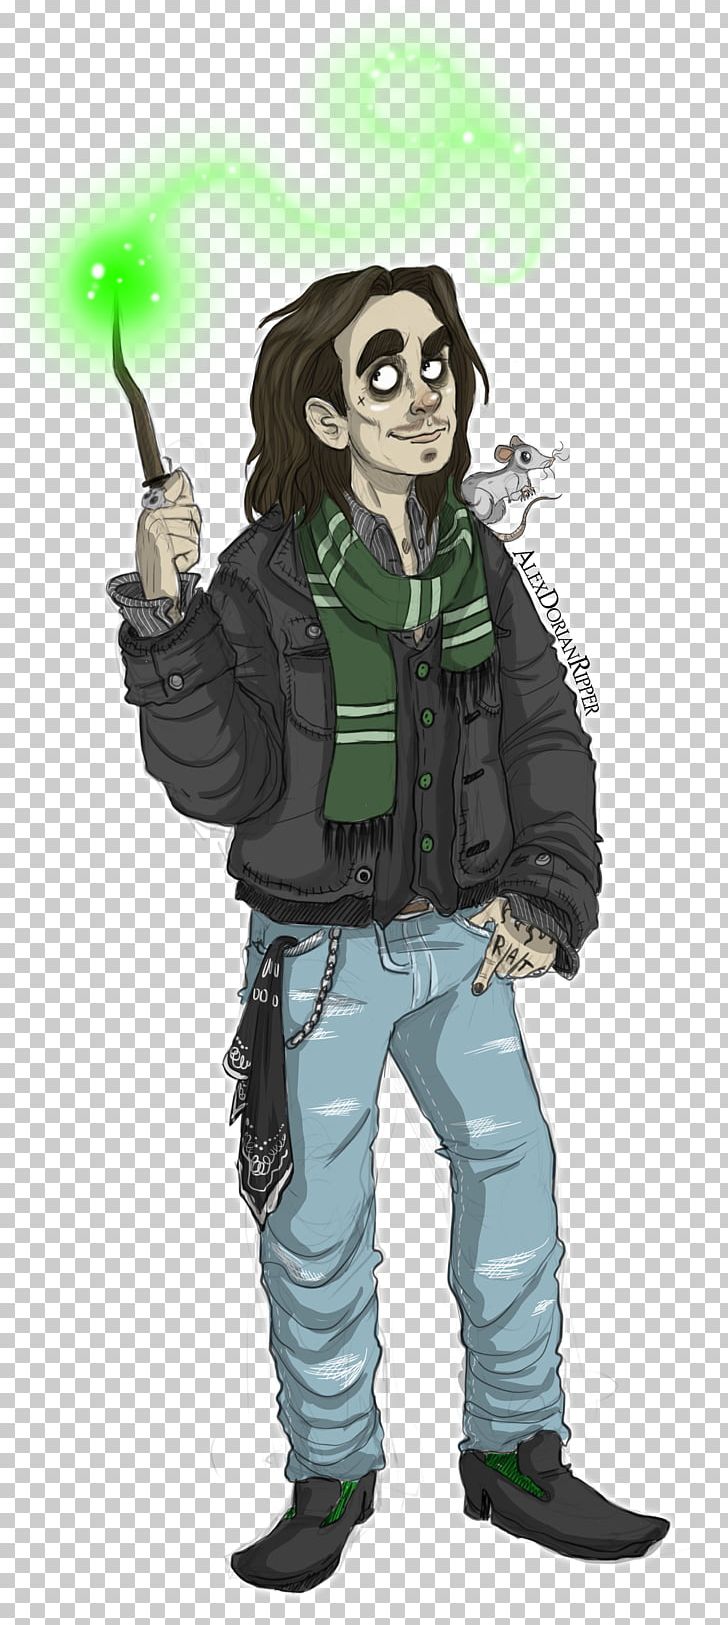 Harry Potter (Literary Series) Professor Severus Snape Hogwarts School Of Witchcraft And Wizardry Fan Art PNG, Clipart, Art, Costume Design, Deviantart, Drawing, Fan Art Free PNG Download